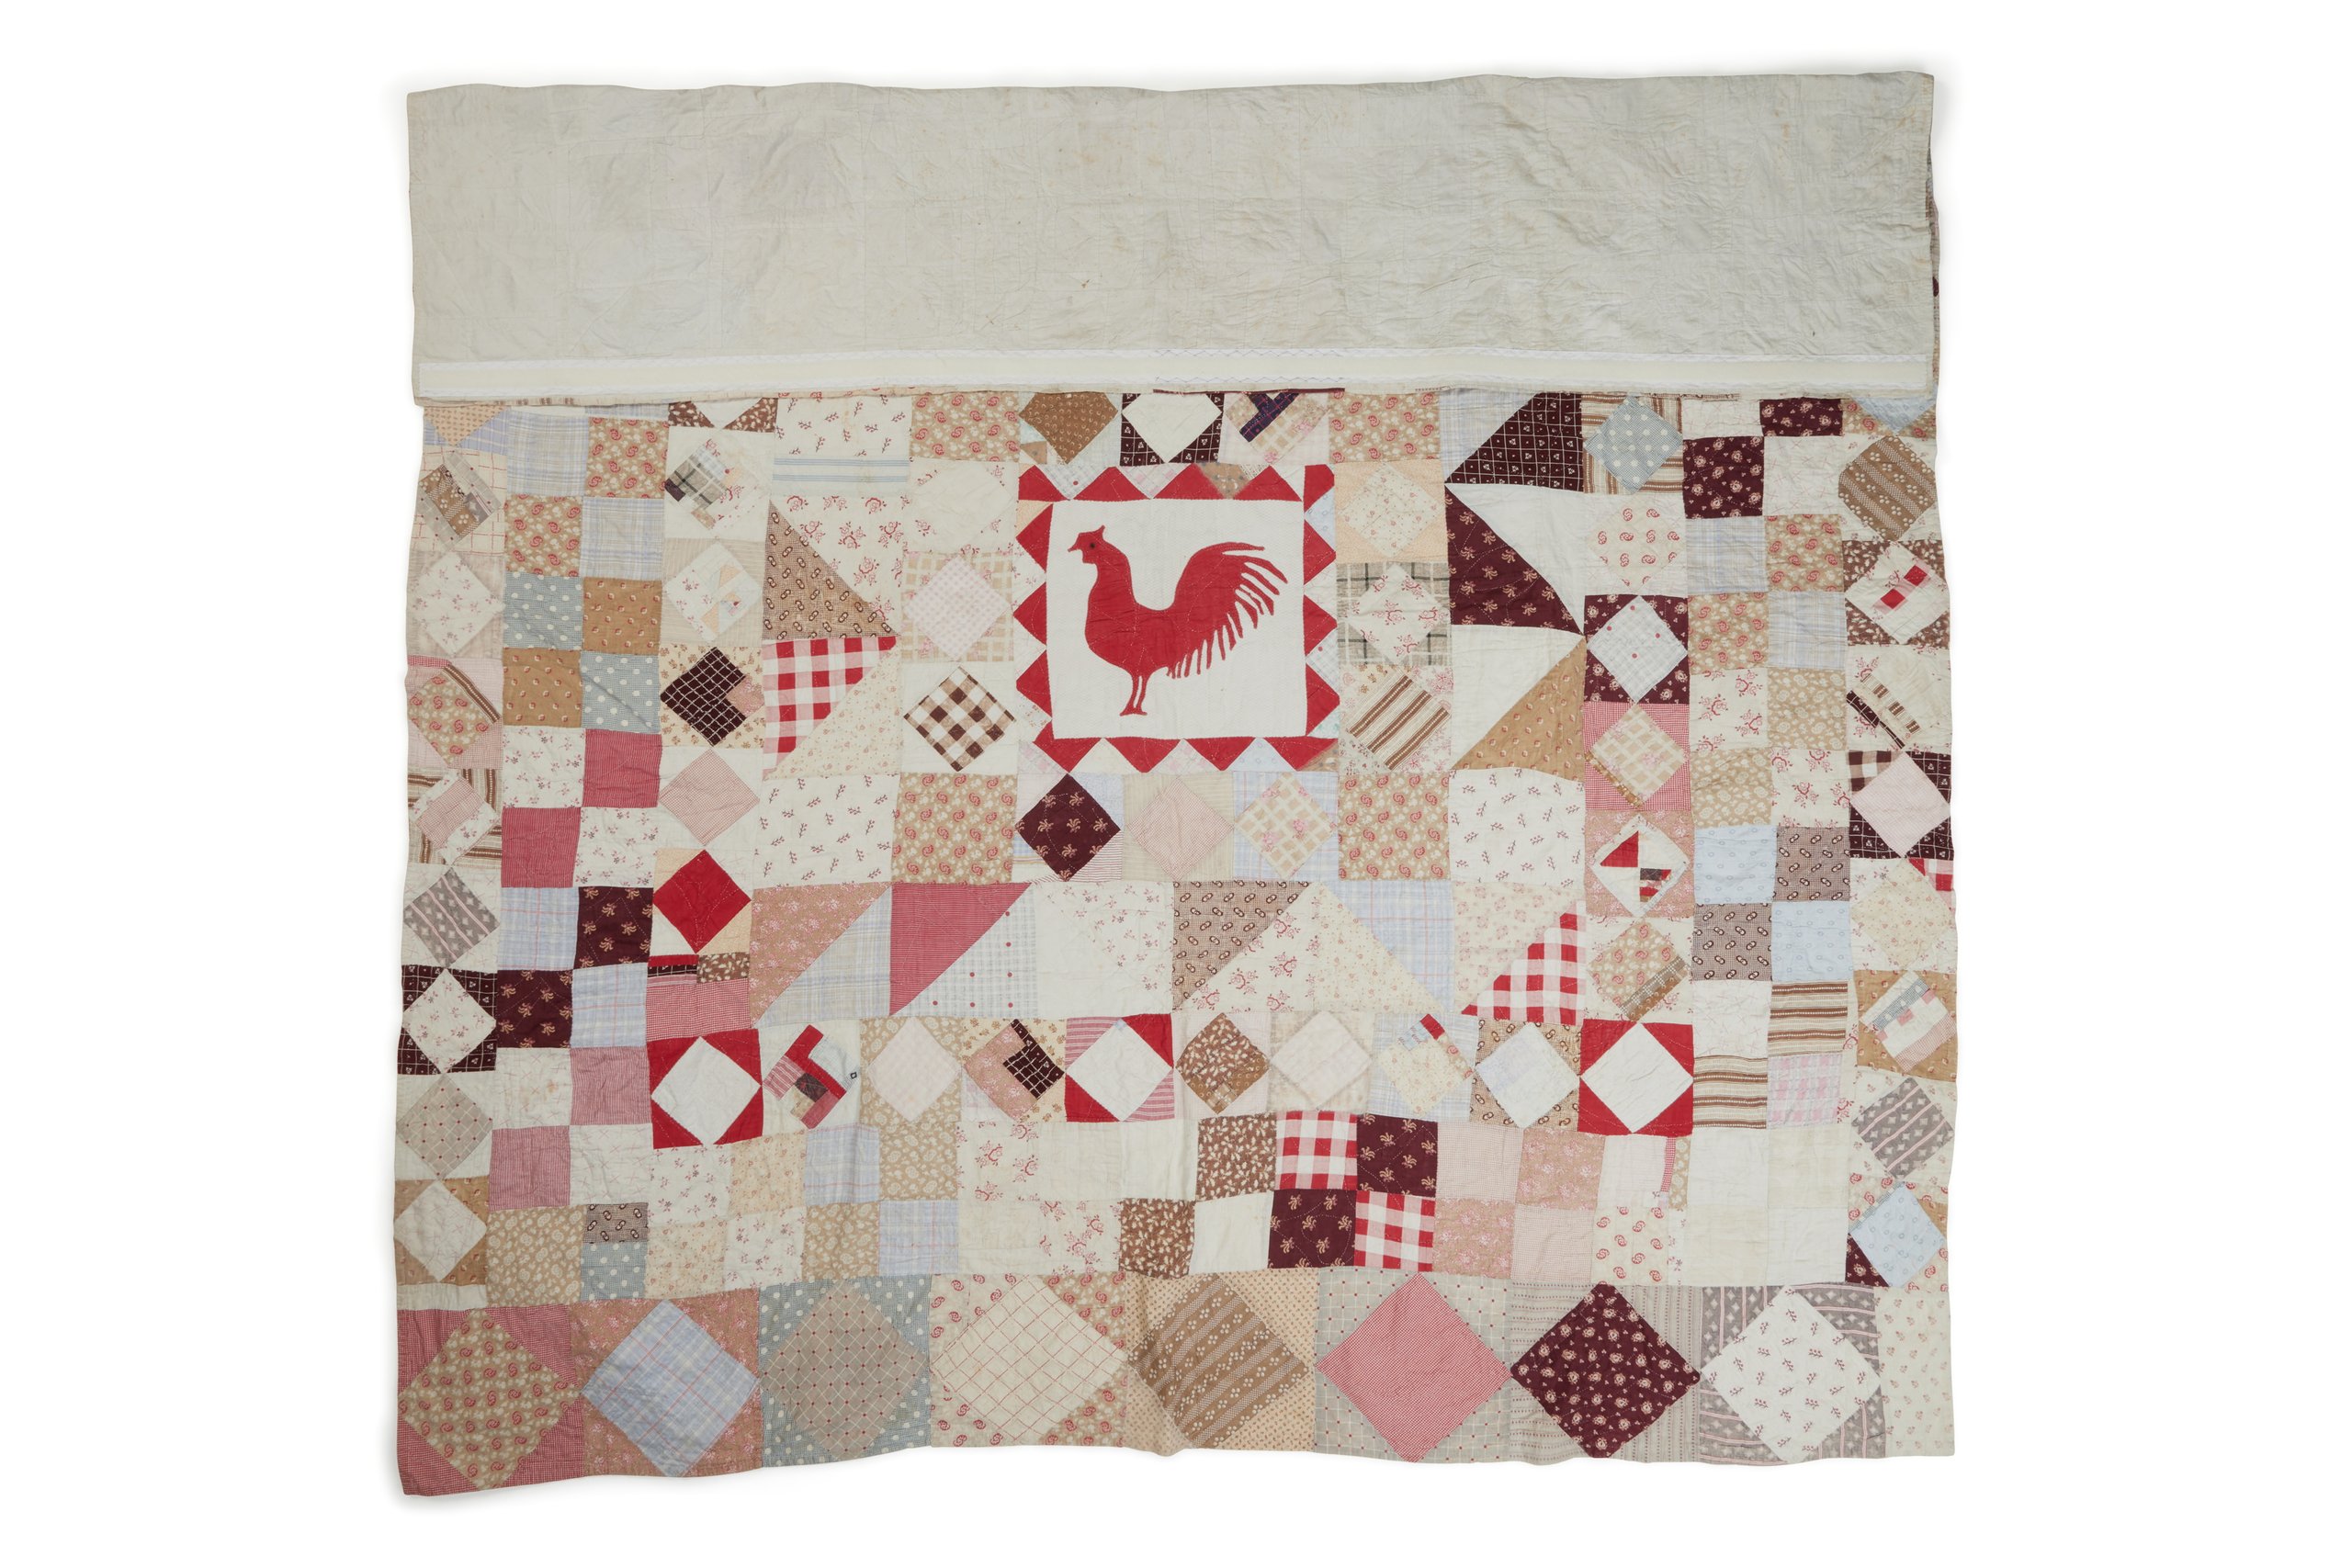 Patchwork quilt by Amelia Brown